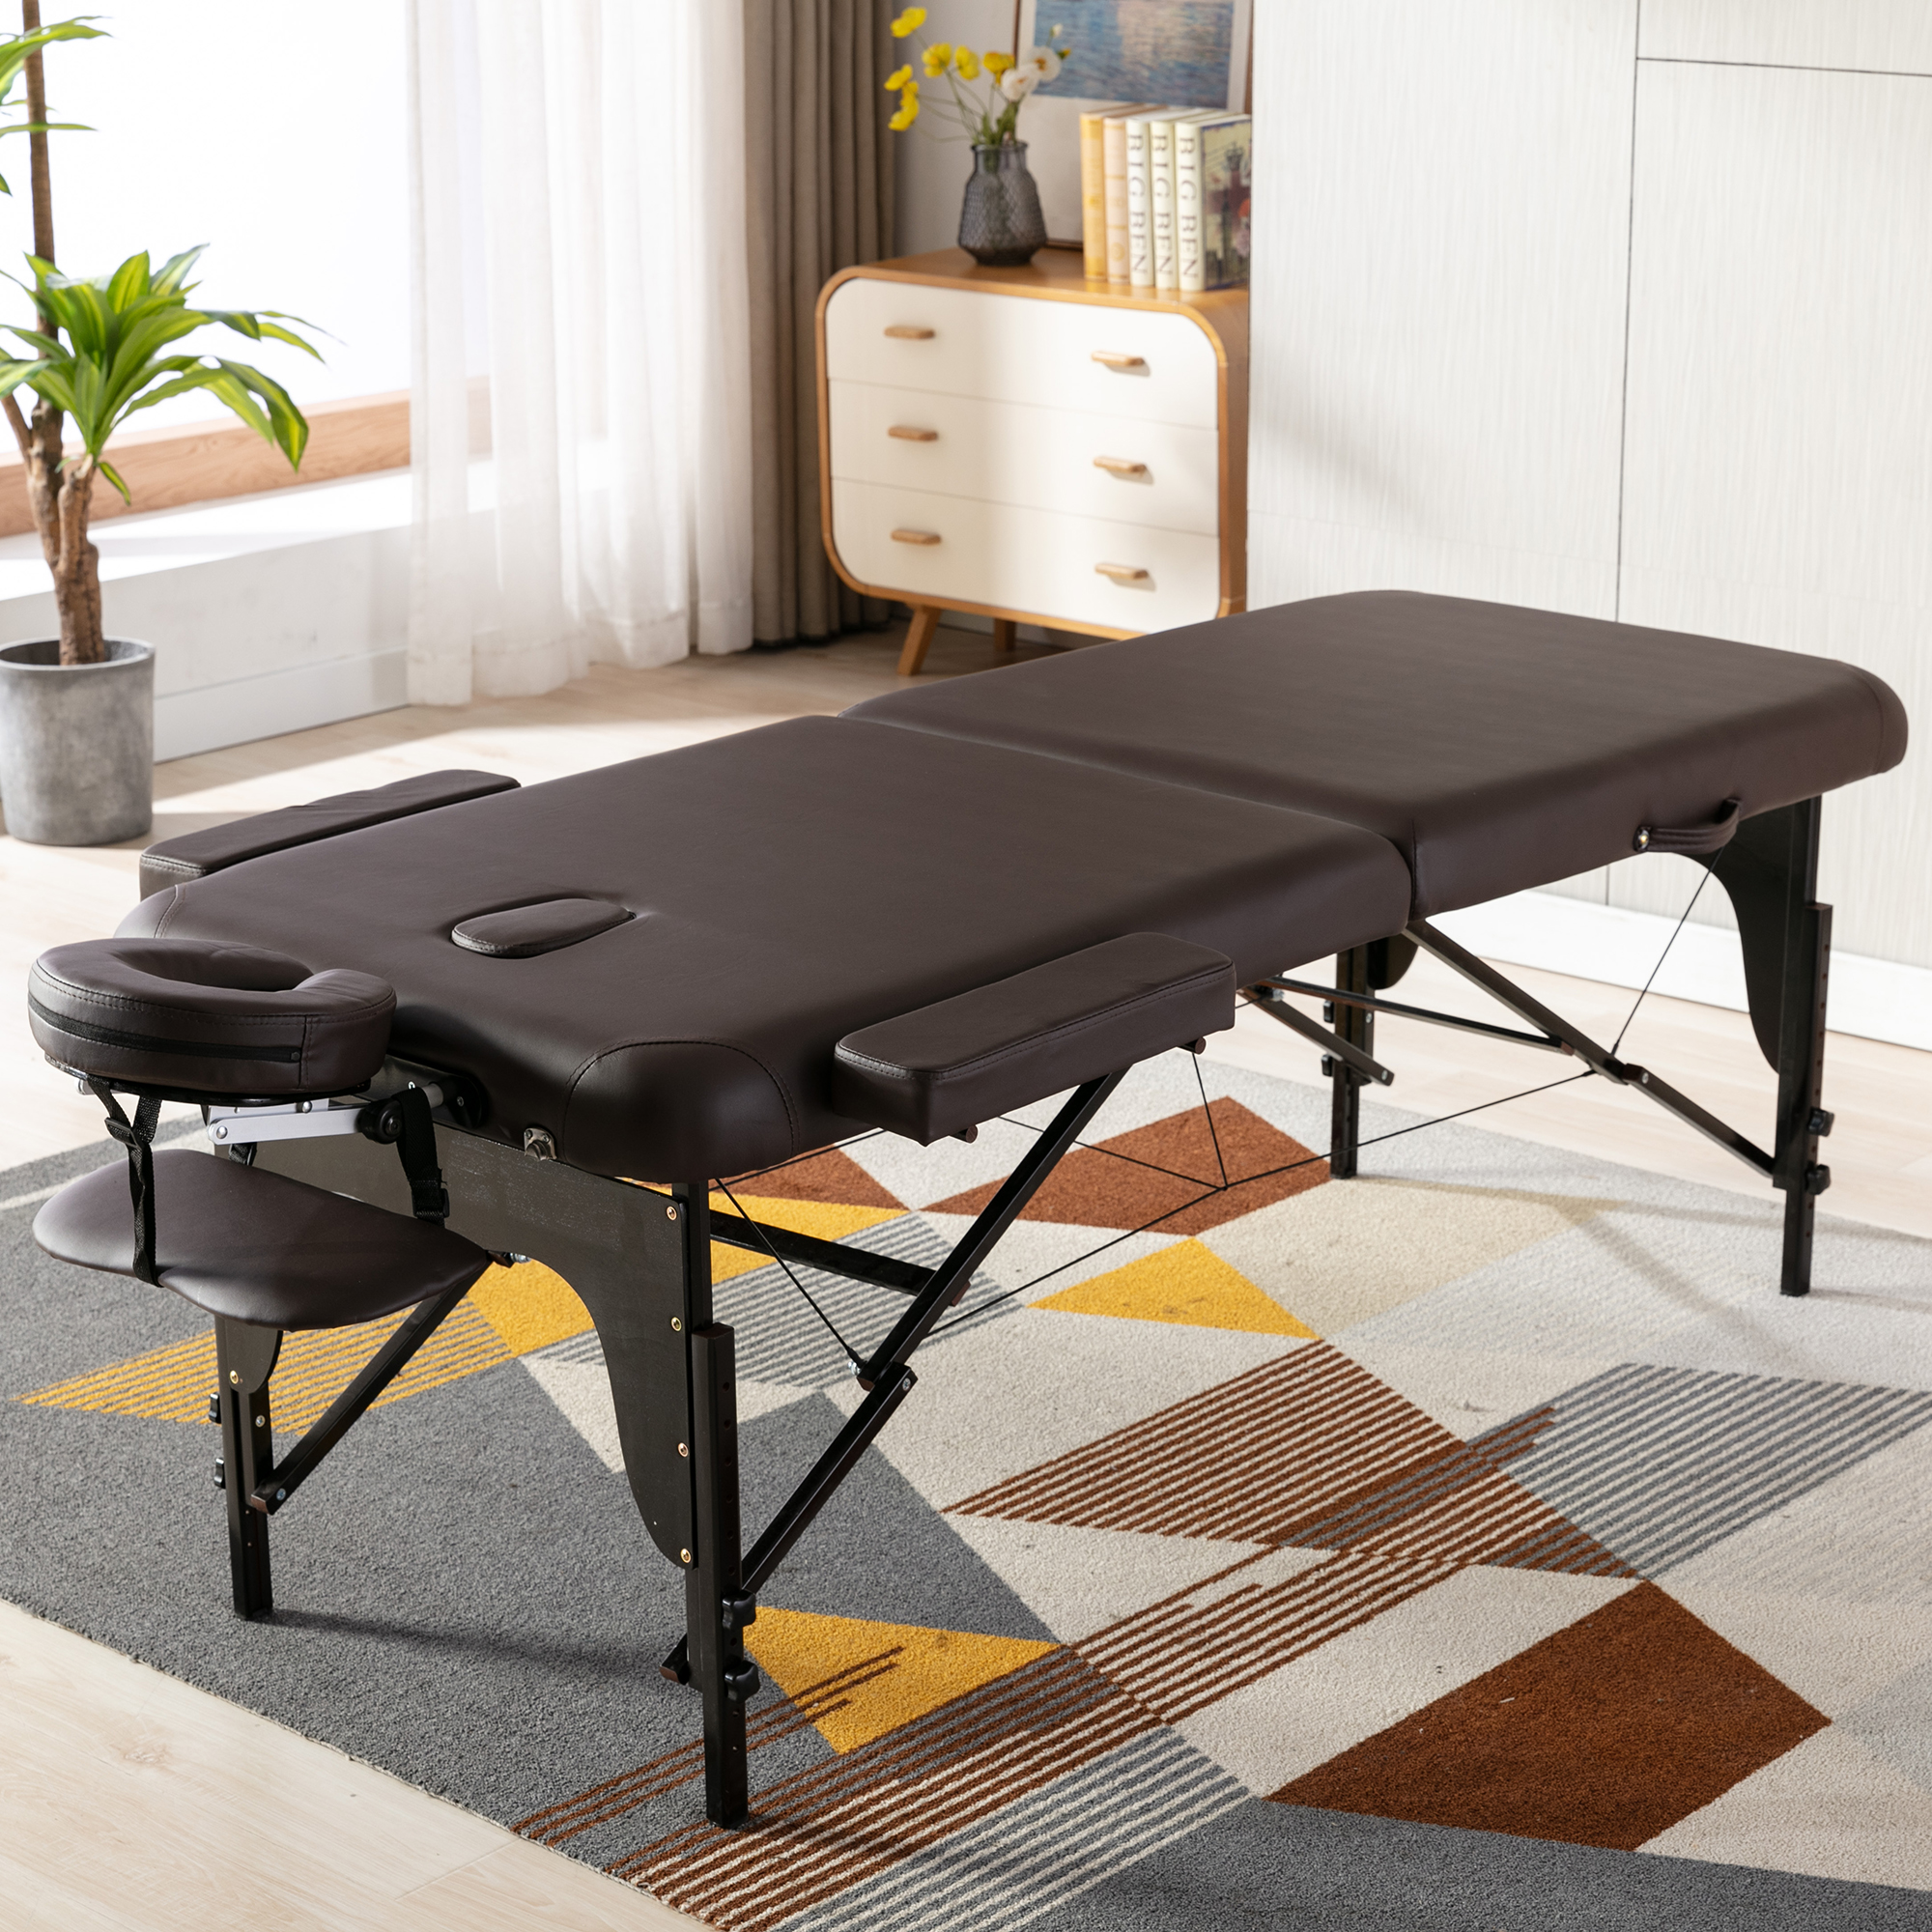 Wooden 2 Section Right Angle Folding Massage Table, PU Leather - W21210149